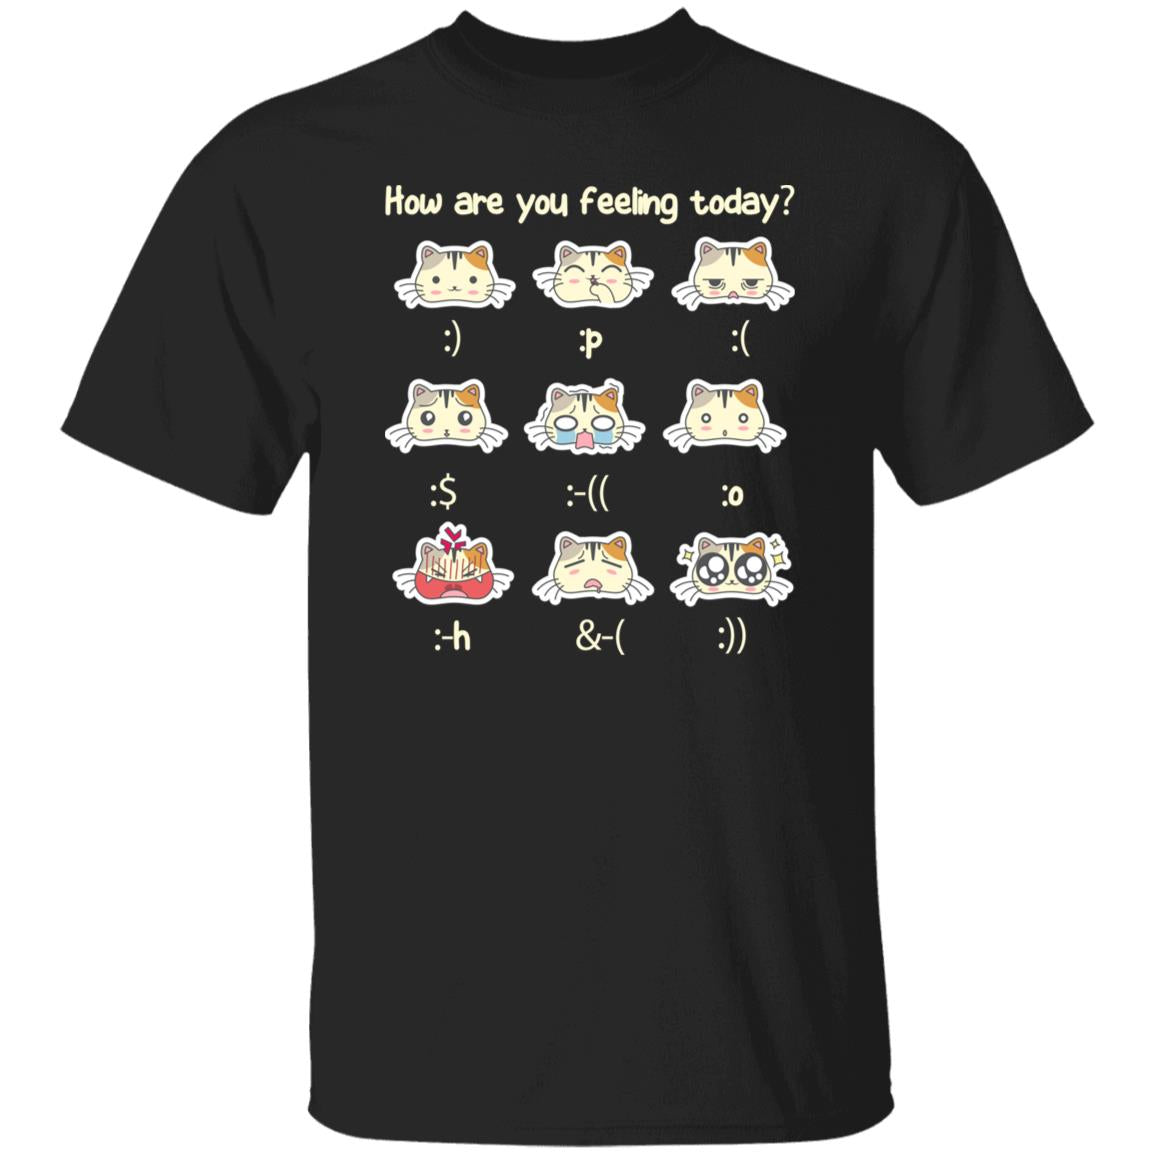 How are you feeling today Unisex shirt cat emoji Black Dark Heather-Family-Gift-Planet